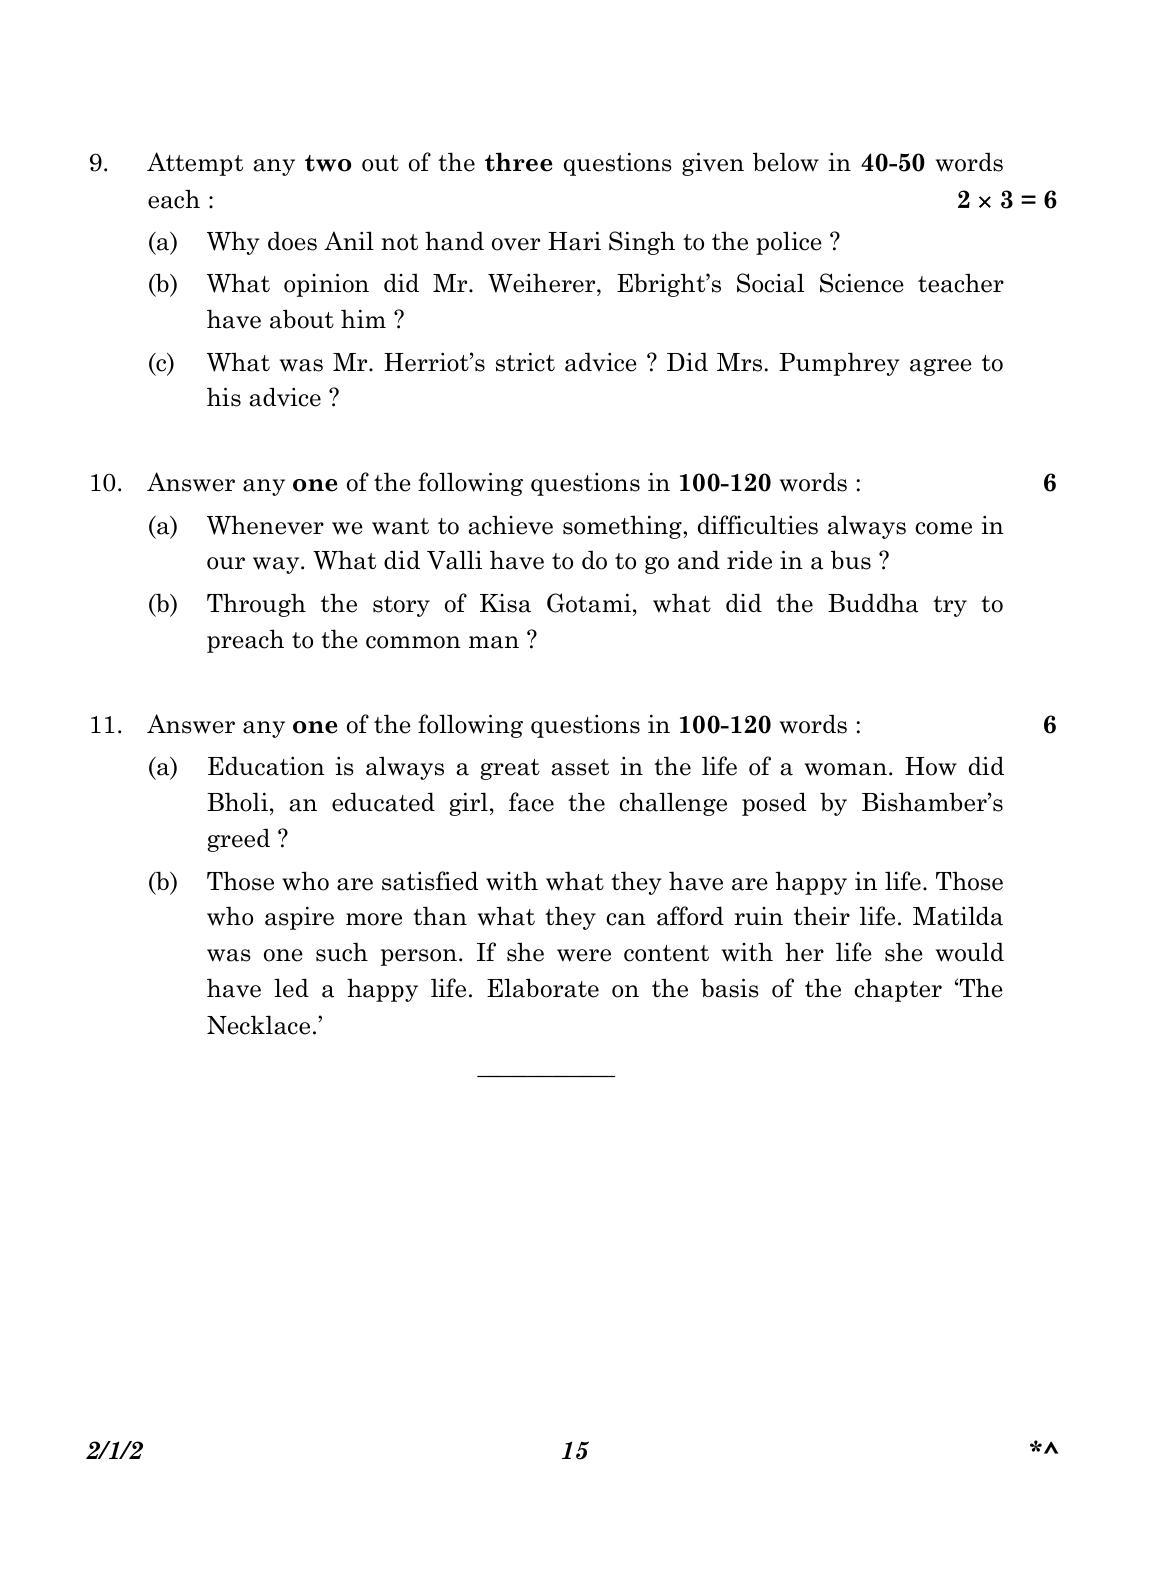 CBSE Class 10 2-1-2_English Language And Literature 2023 Question Paper - Page 15